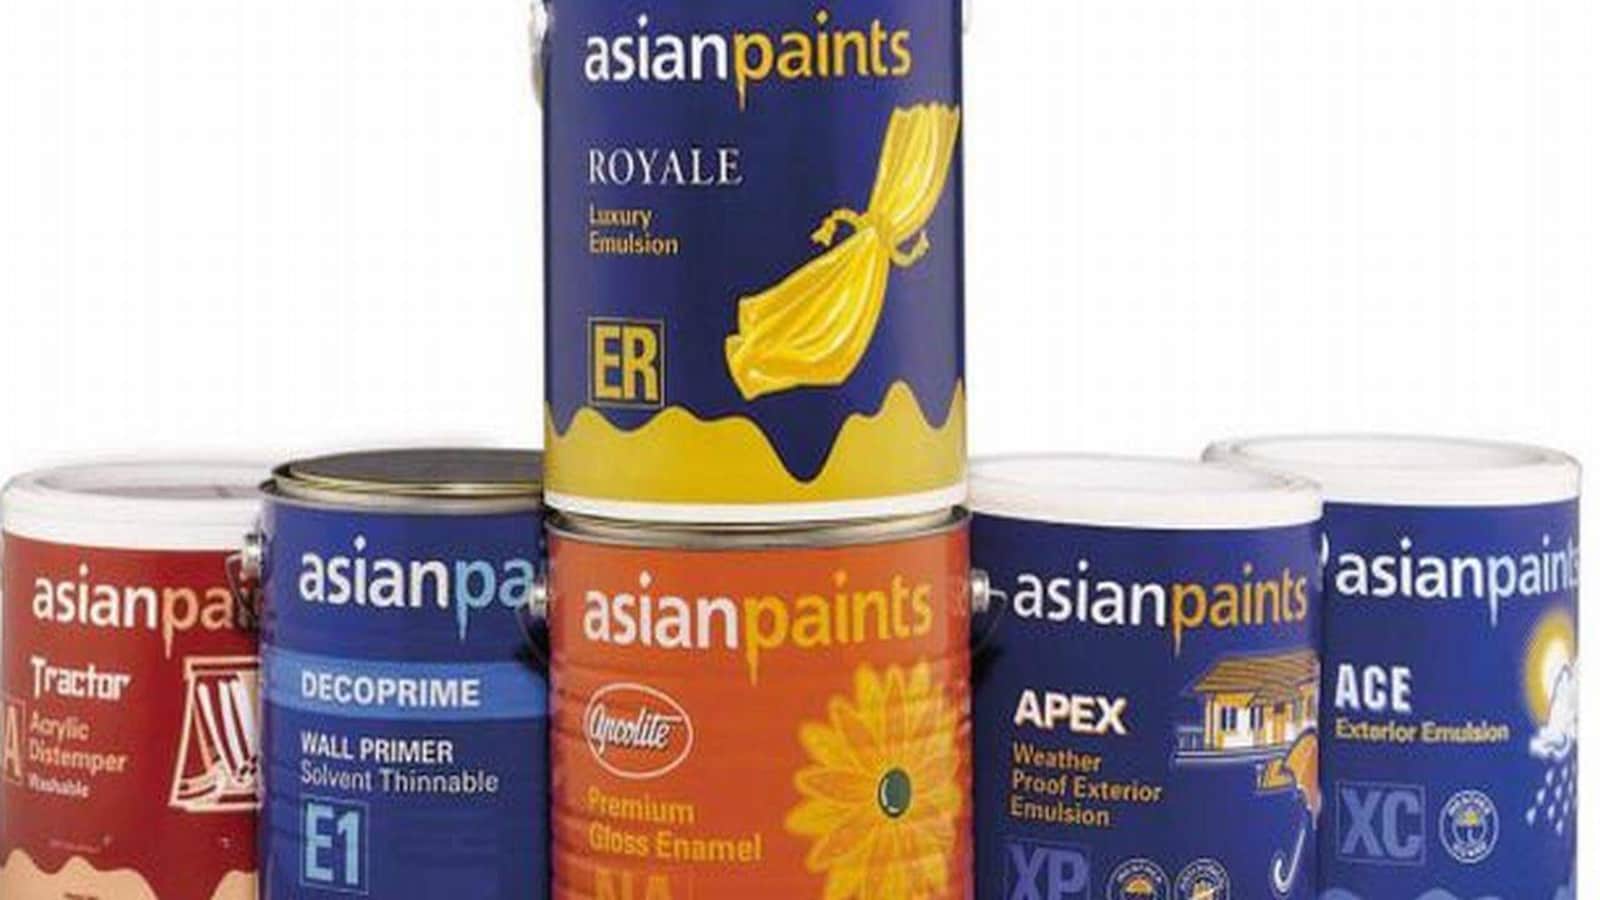 Asian Paints – Volumes, margins shine bright in Q1, but is there a stain?